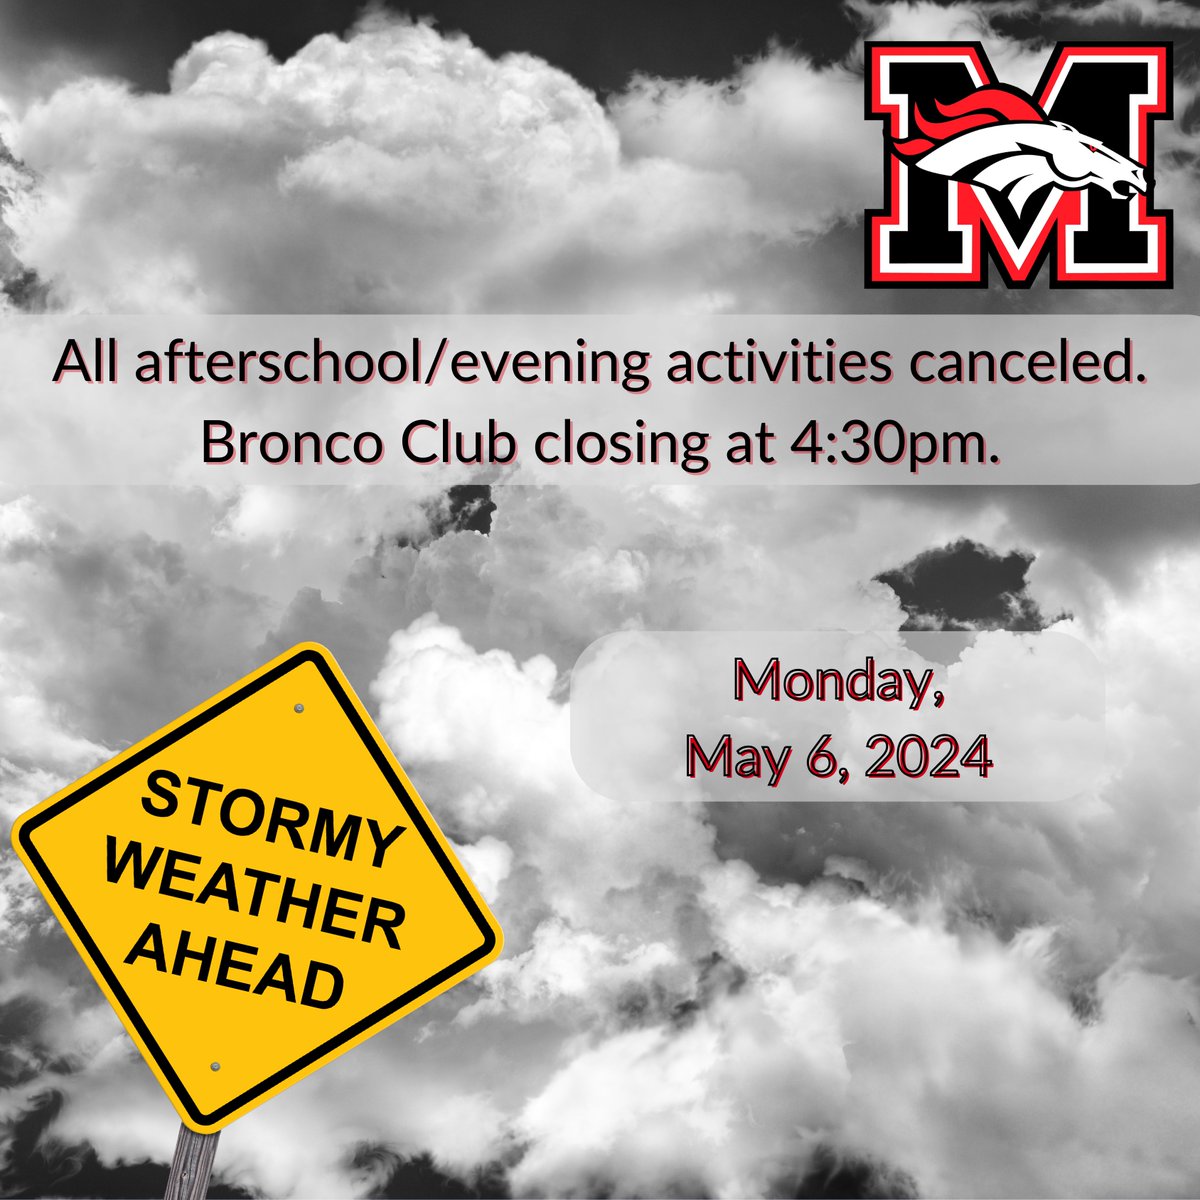 Due to the forecasted severe weather & potential associated impacts this evening, we have canceled all afterschool/evening activities for today, Mon, 5/6/24. Bronco Club will close at 4:30pm today. Coaches/Sponsors/Schools will be in touch regarding rescheduling of any events.